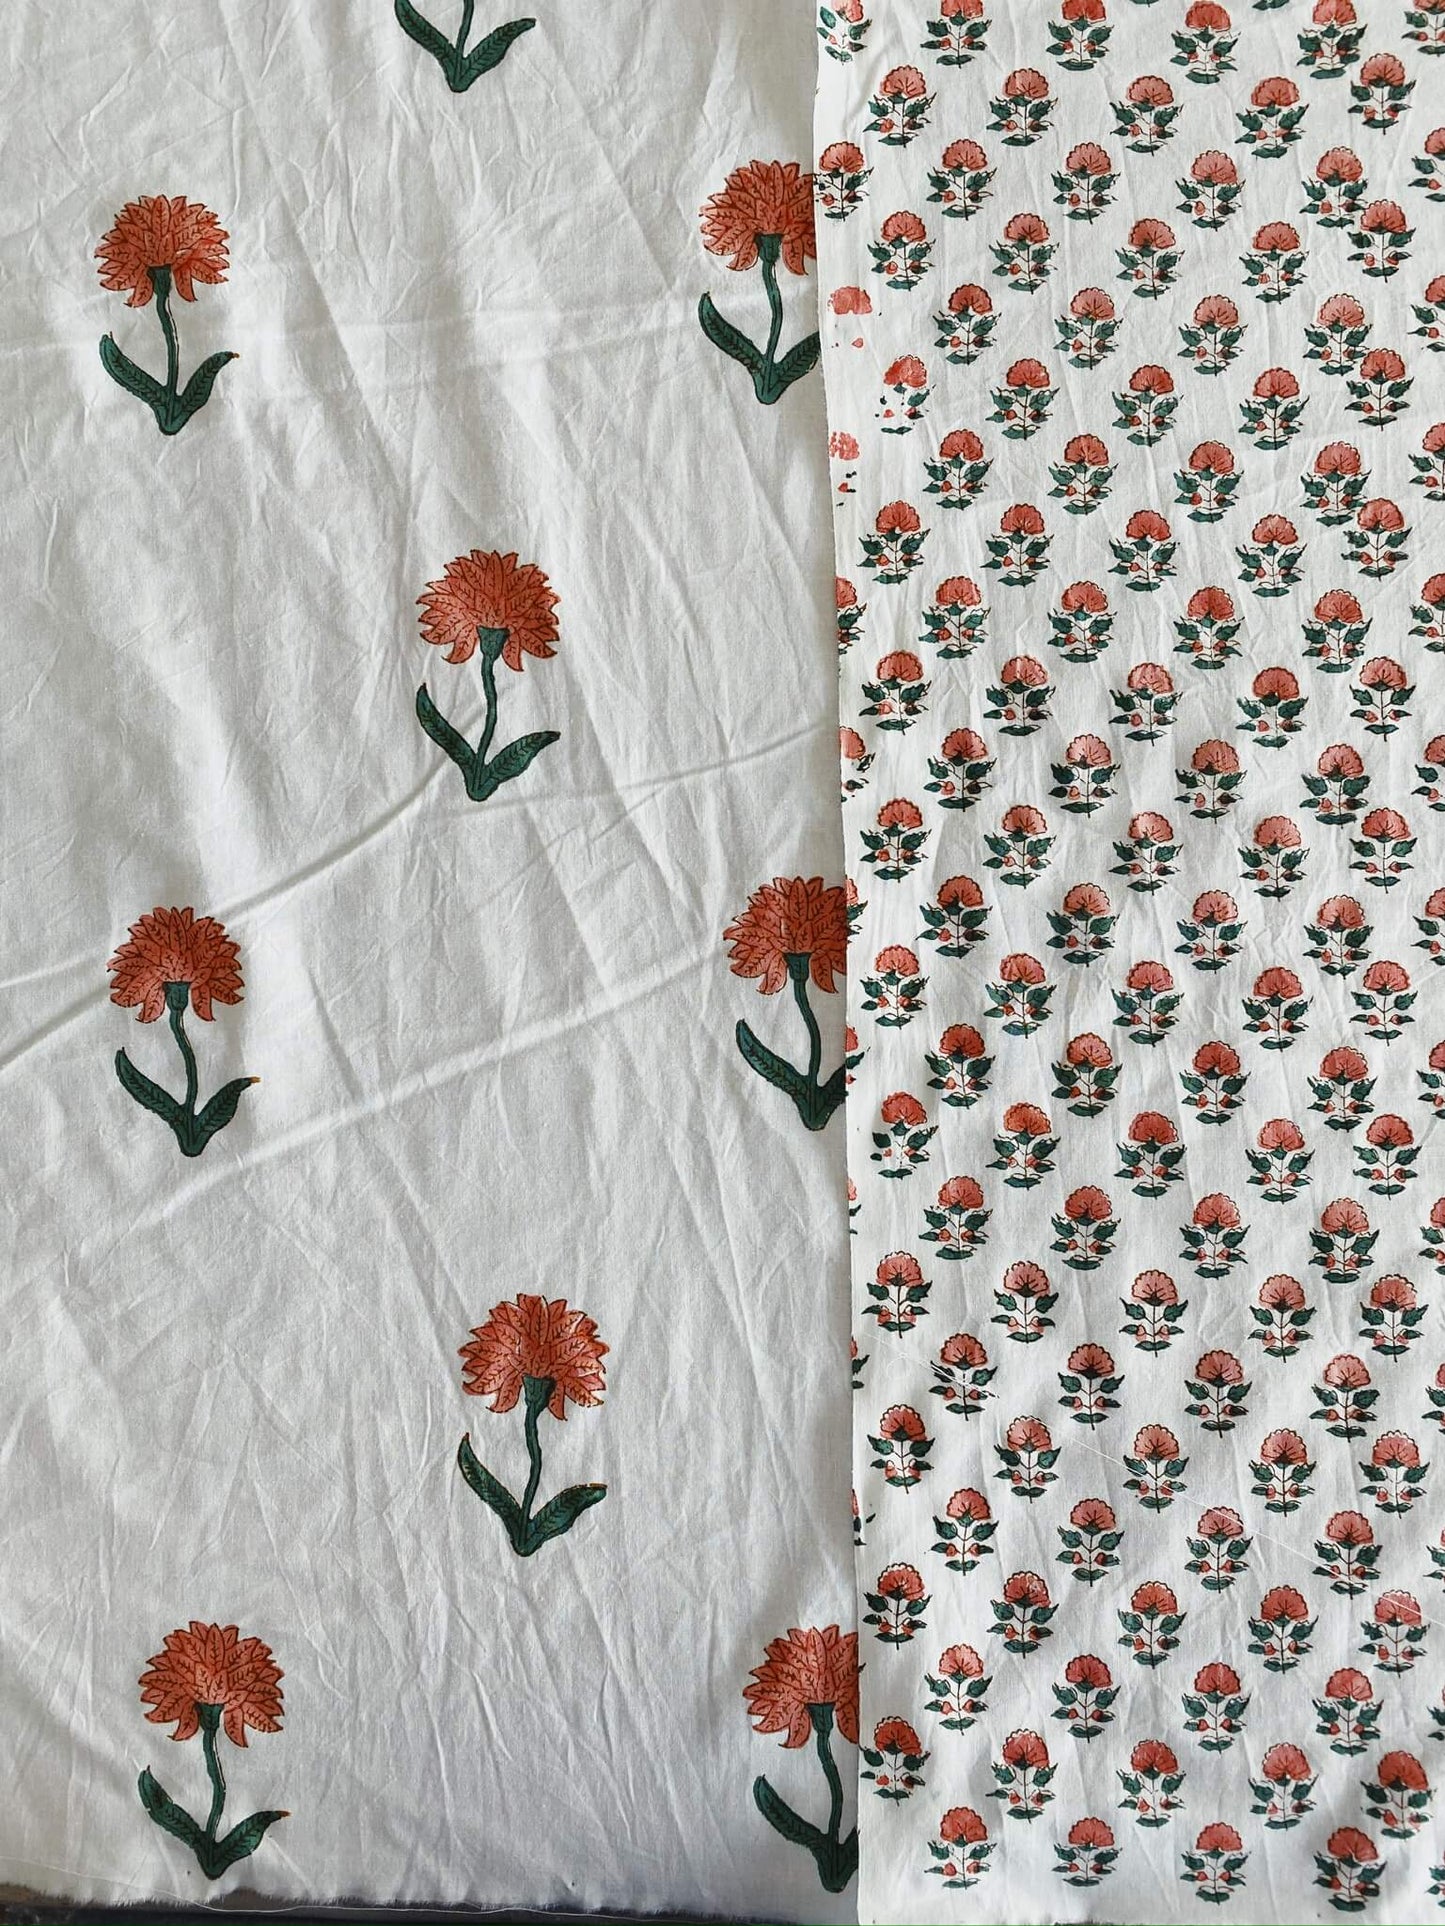 Two white and red floral pattern textiles side by side